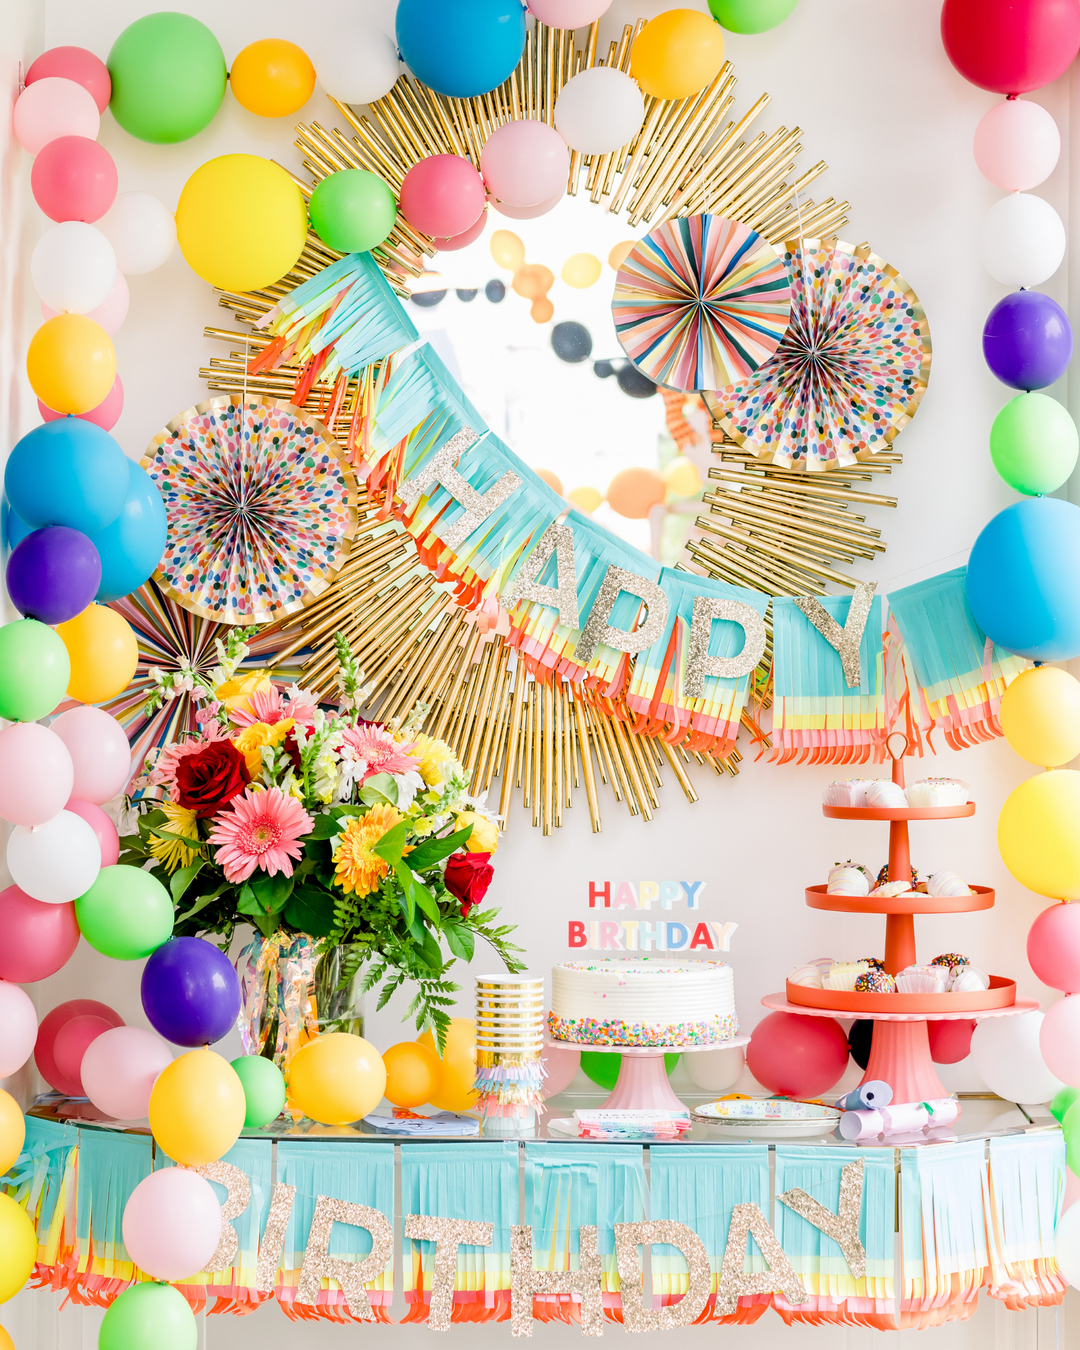 Kids Birthday - Party Supplies & Decorations